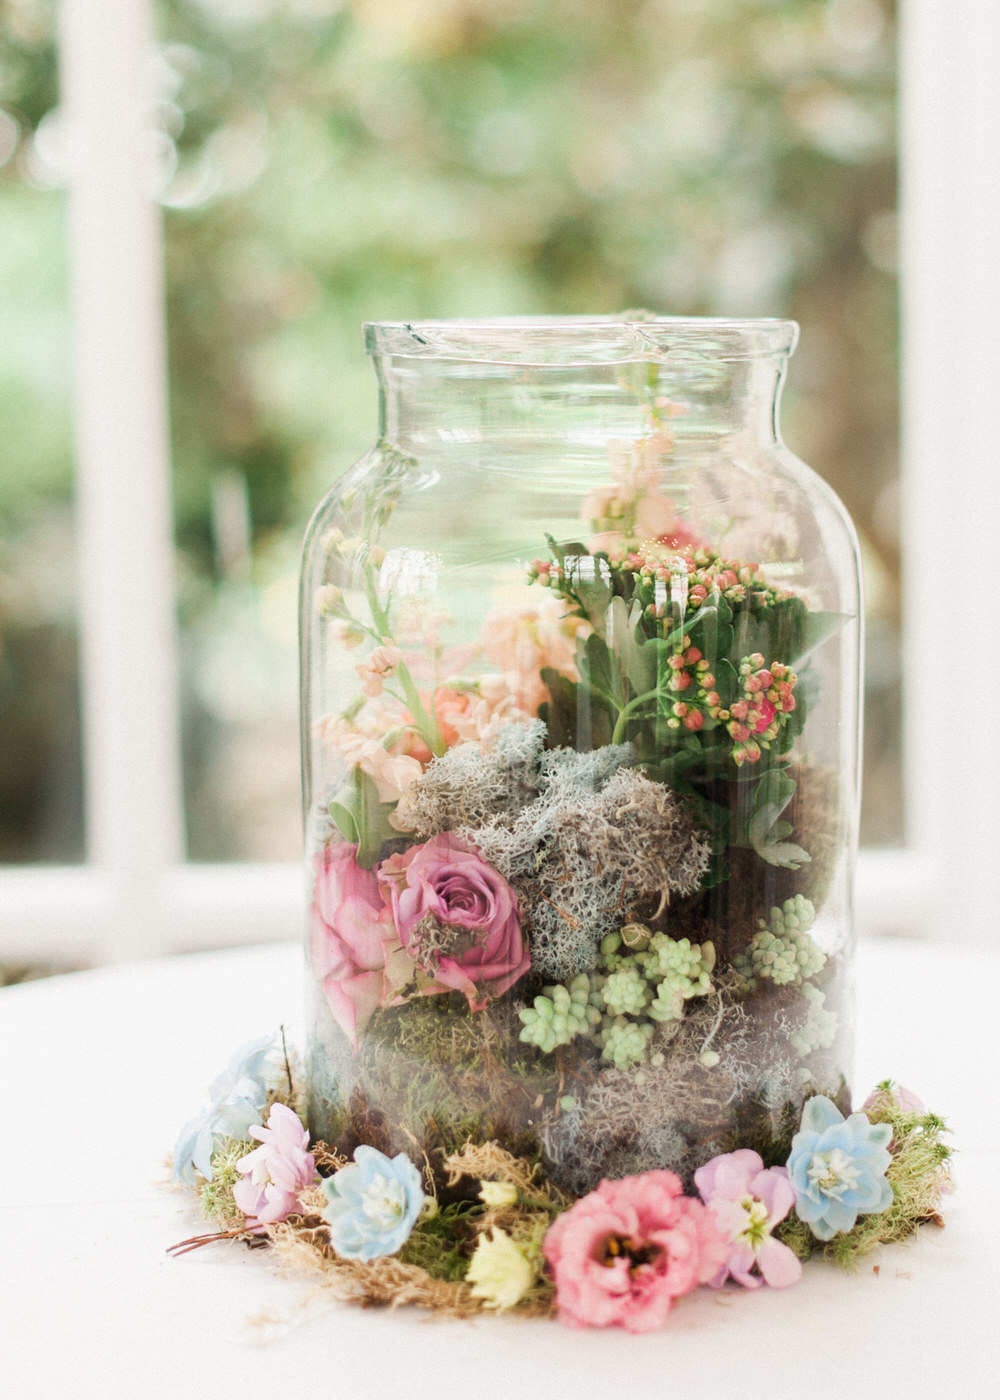 Floral Terrarium | A Midsummer nights dream inspired children's birthday party with stunning floral, fairy entertainment, crafts and a picnic. Photos by Kate Nielen.